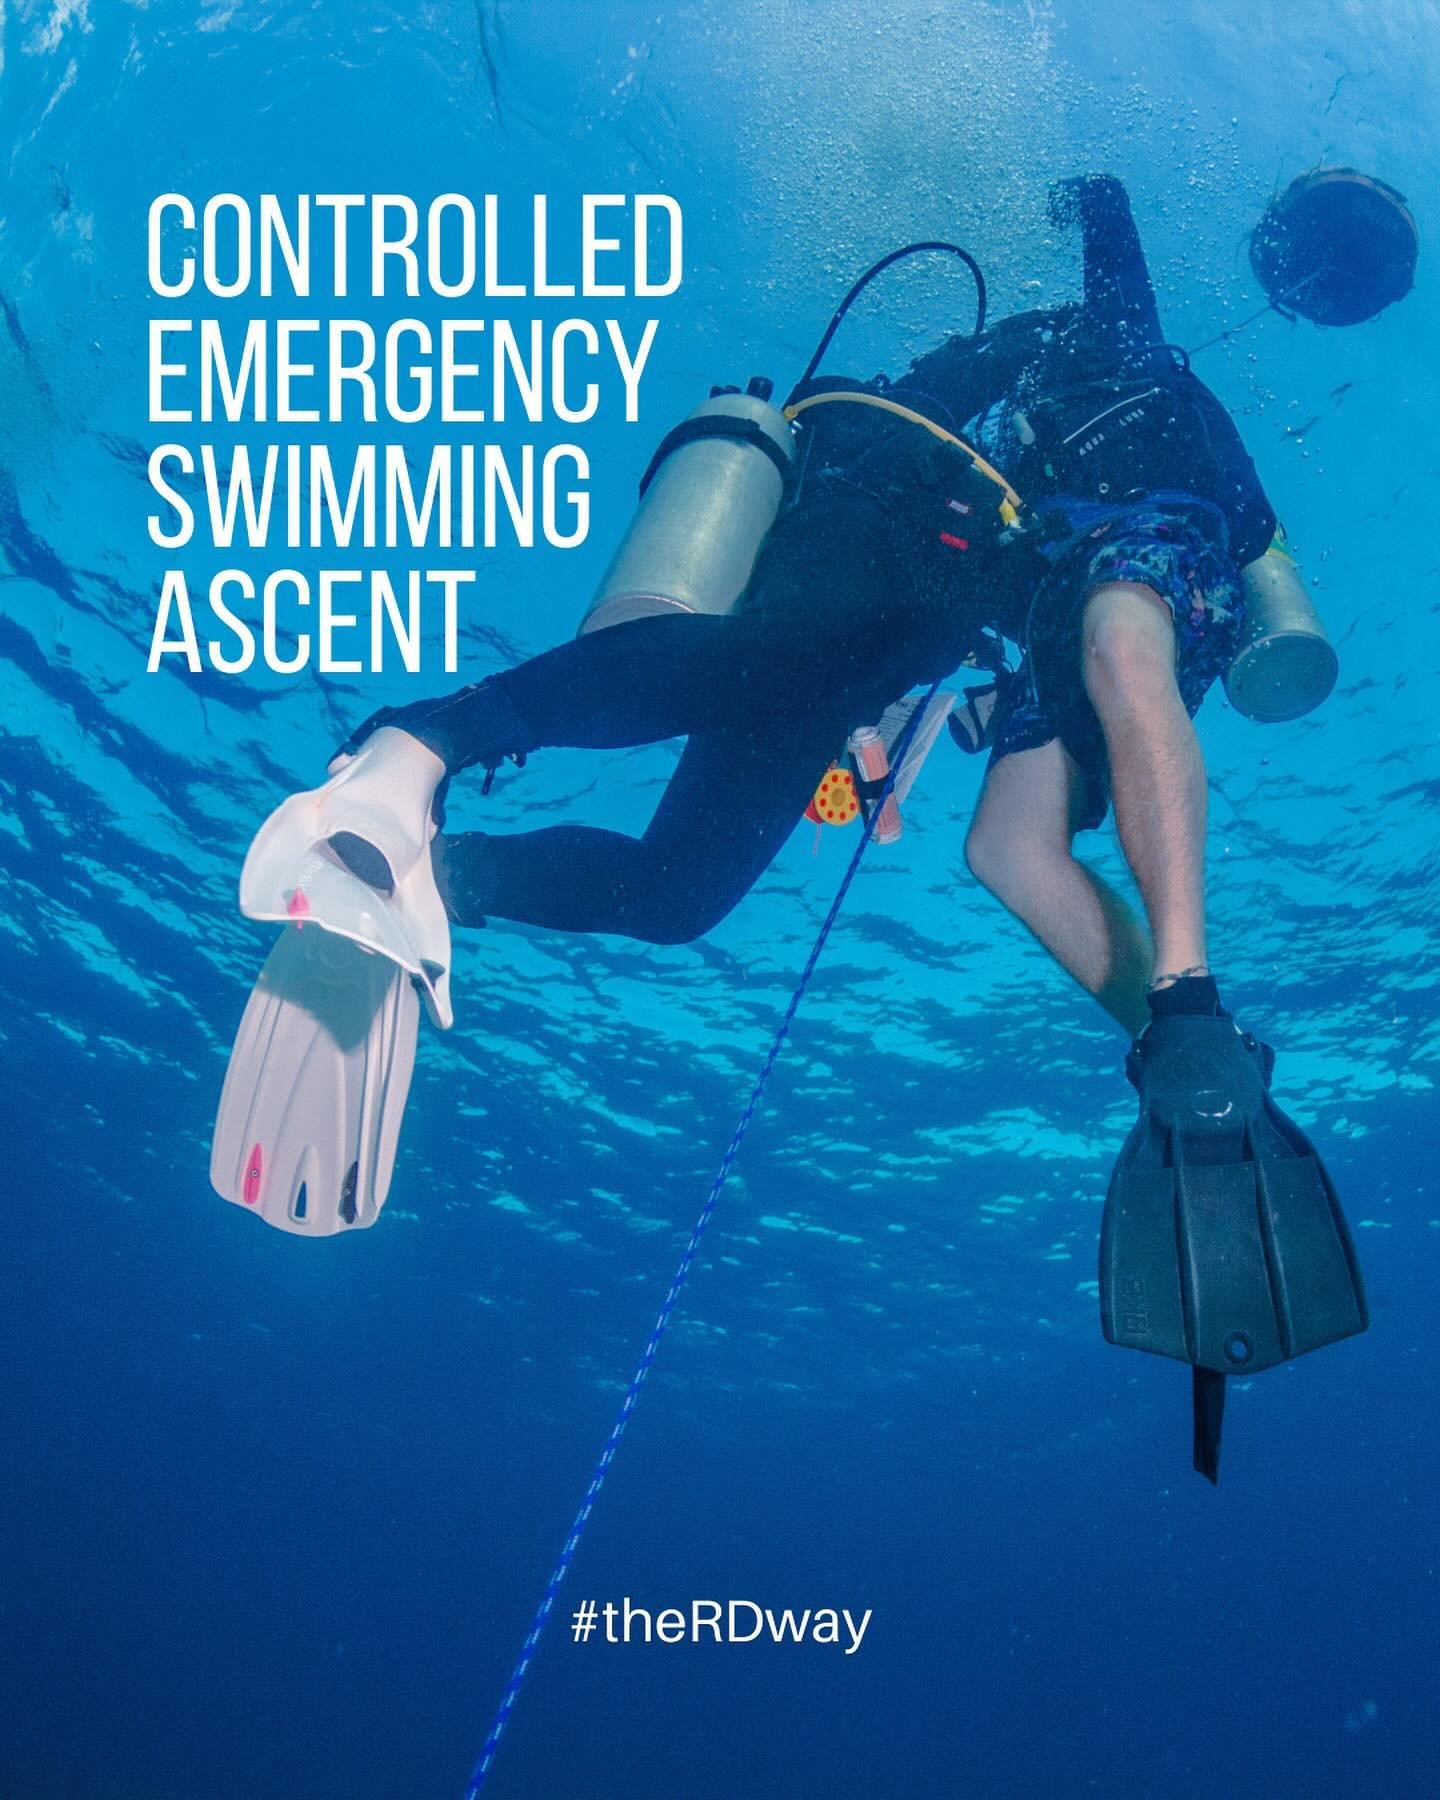 We teach CESA, Controlled Emergency Swimming Ascent, in Open Water courses because in a unlikely situation that you are out of air and far away from your buddy you can safely reach the surface.

As instructors, it&rsquo;s important to know how to pro